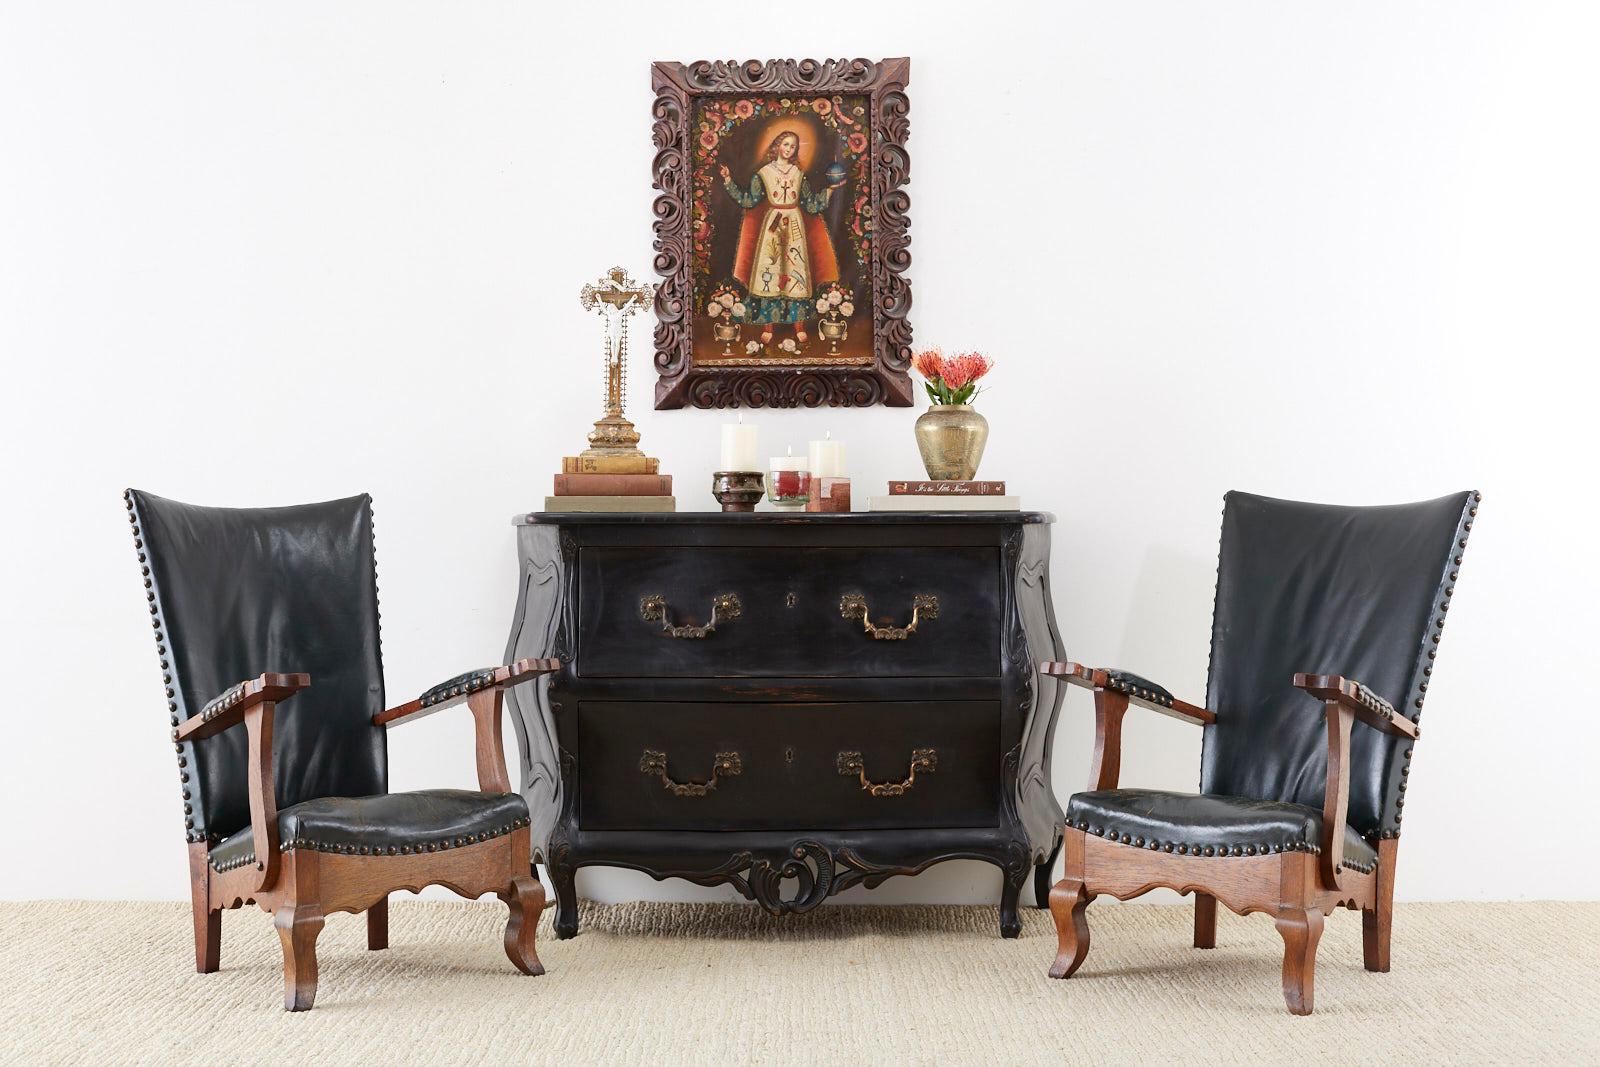 Amazing pair of Spanish colonial revival mission style arm chairs or lounge chairs. Constructed from Spanish oak and finished in a hunter green leather. The chairs have a tall, winged back and feature large brass tack nail head along the borders.